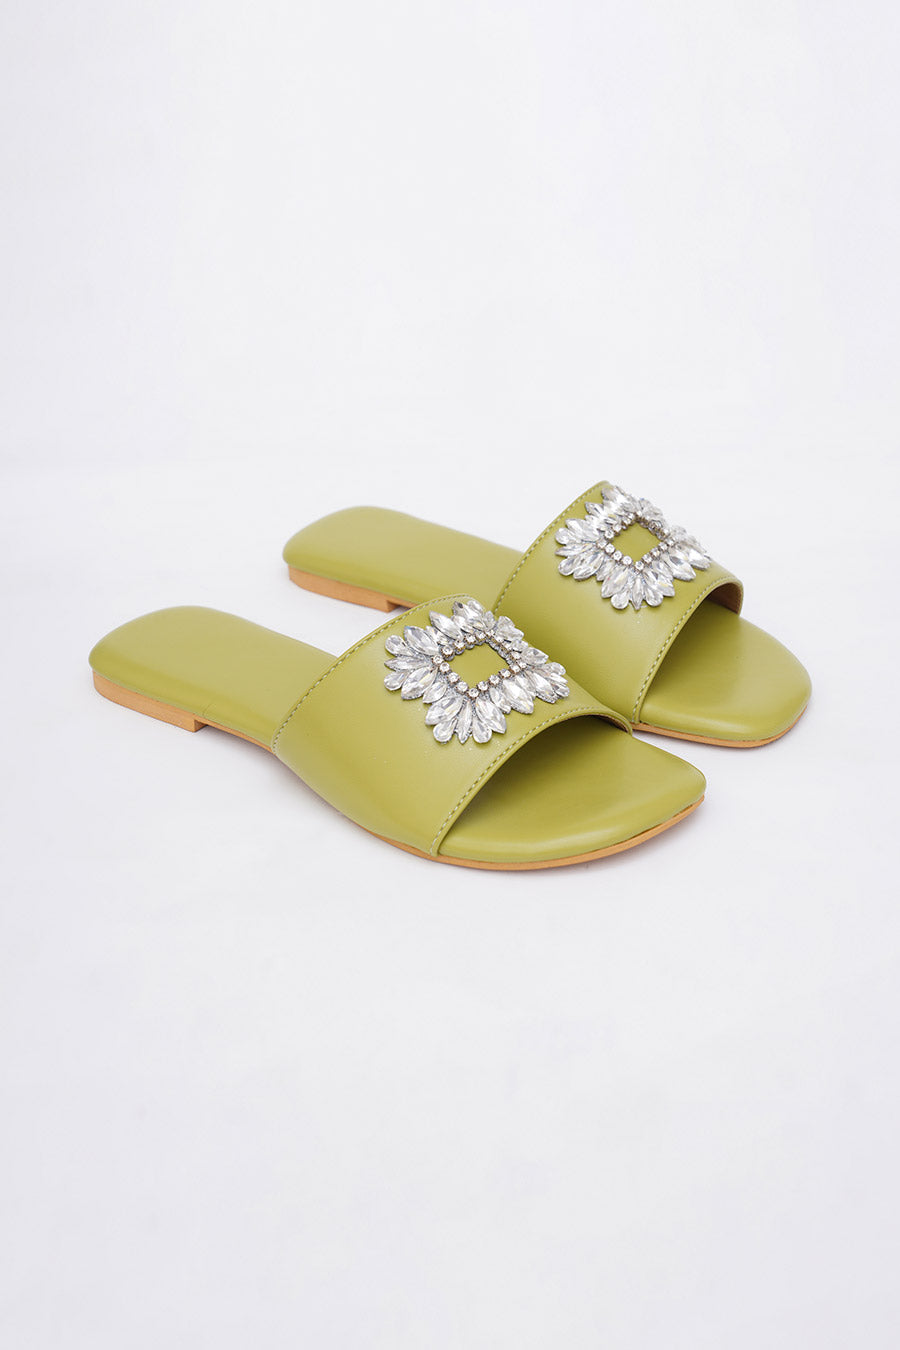 Sole House - Cream Pu Leather Marilyn Pearl Embroidered Mule Flats